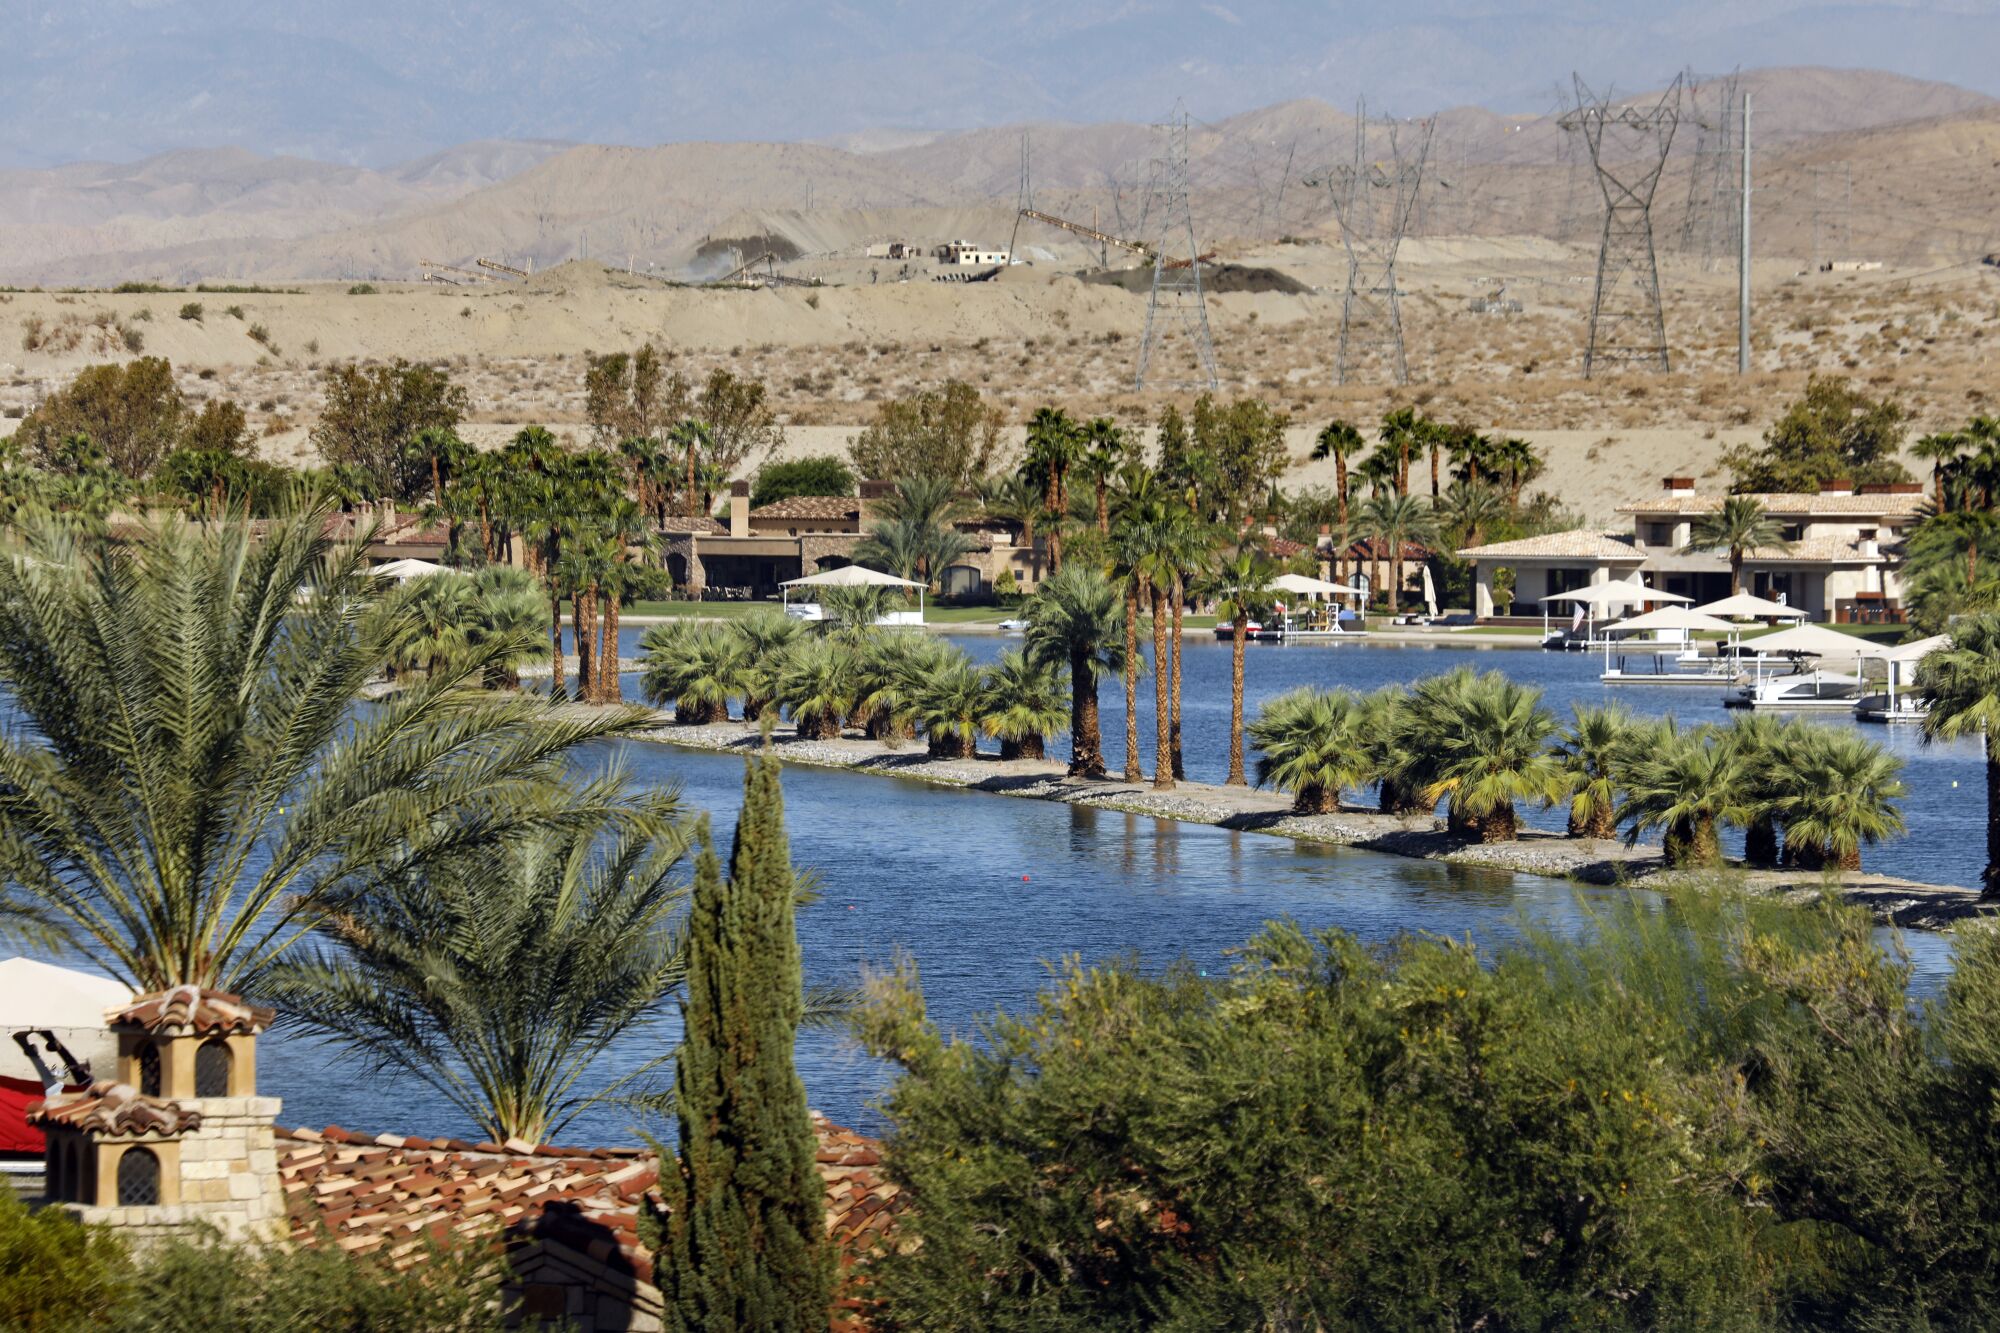 Artificial lake in the desert surrounded by houses